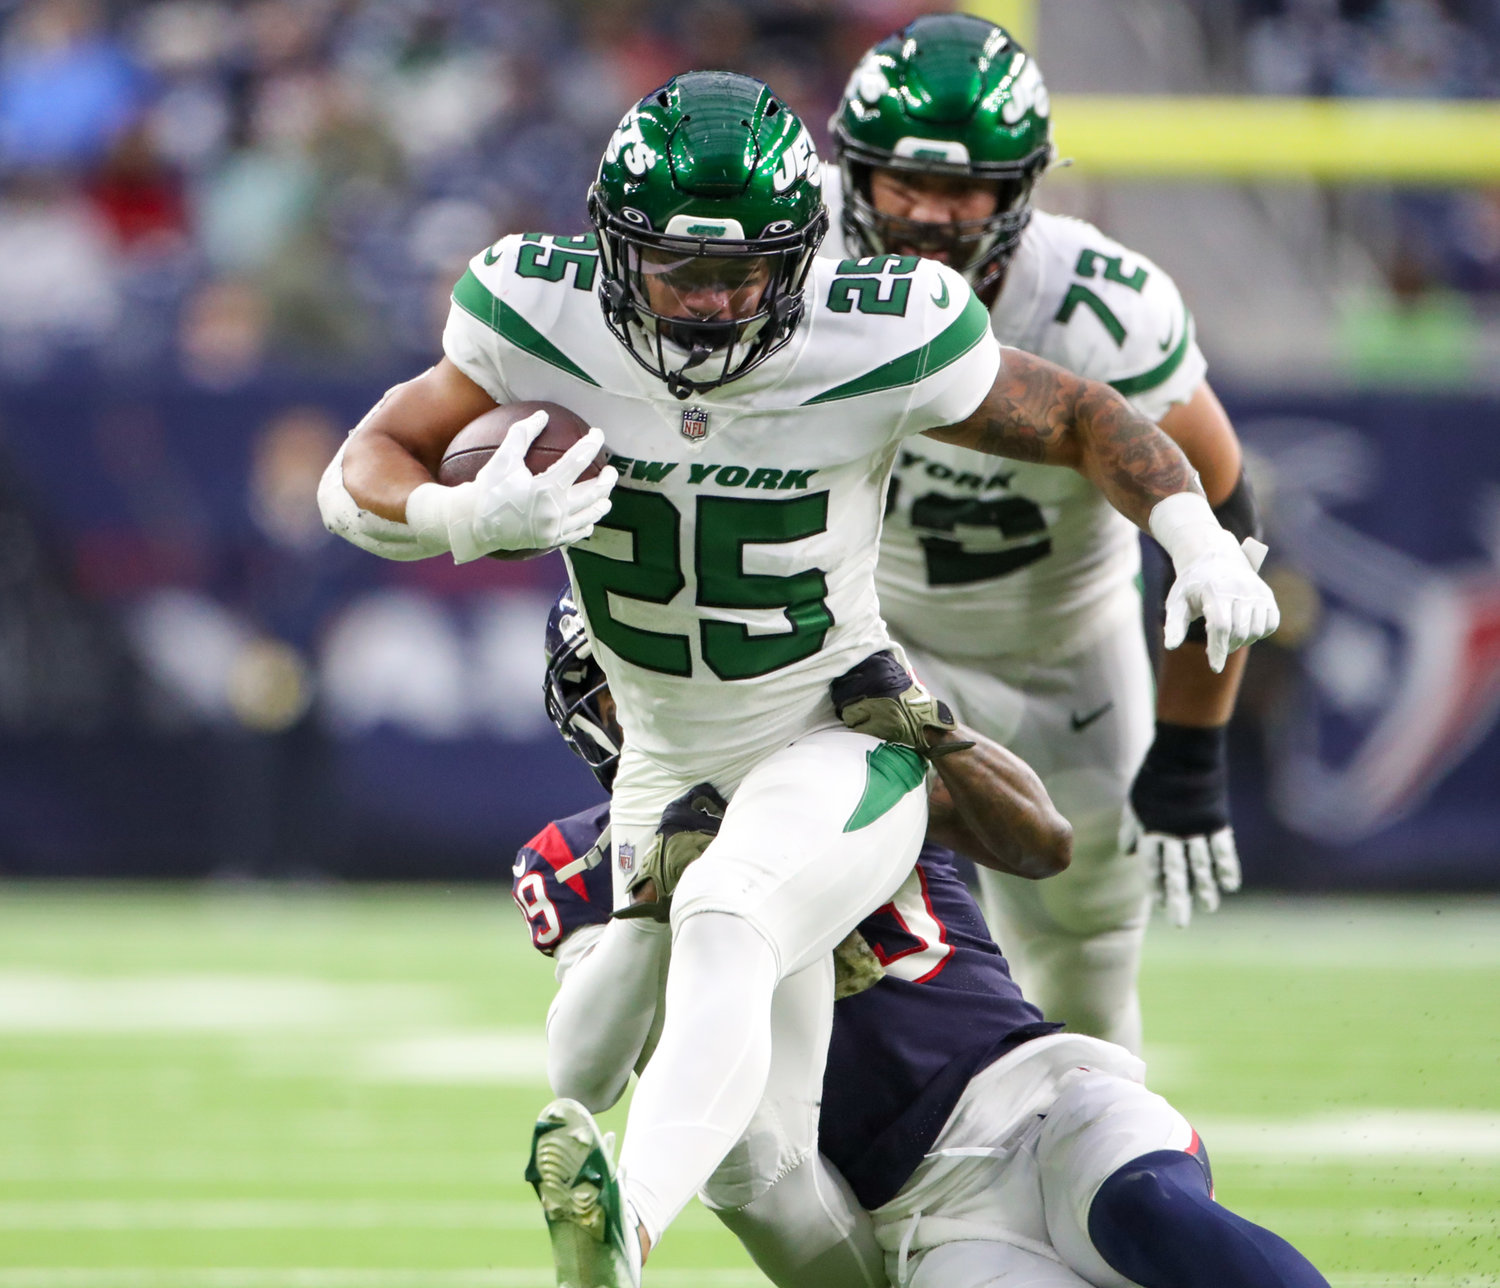 New York Jets running back Ty Johnson (25) carries the ball during an NFL game between the Houston Texans and the New York Jets on November 28, 2021 in Houston, Texas. The Jets won, 21-14